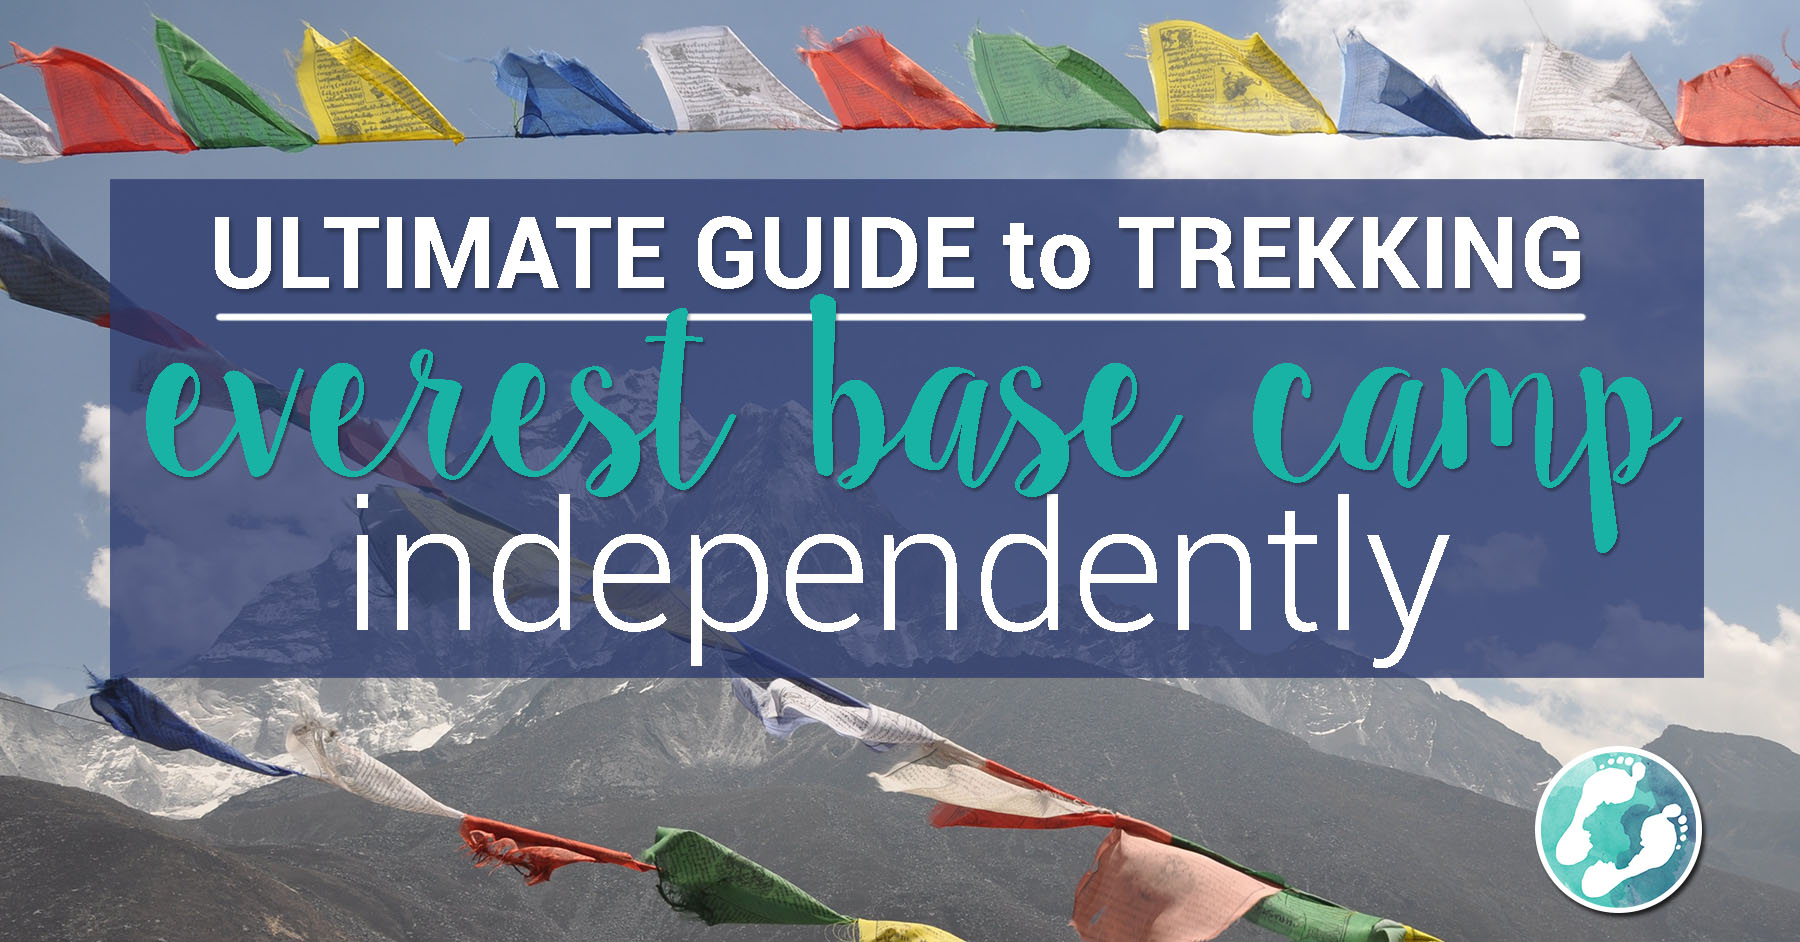 Complete Guide to Trekking Everest Base Camp Independently